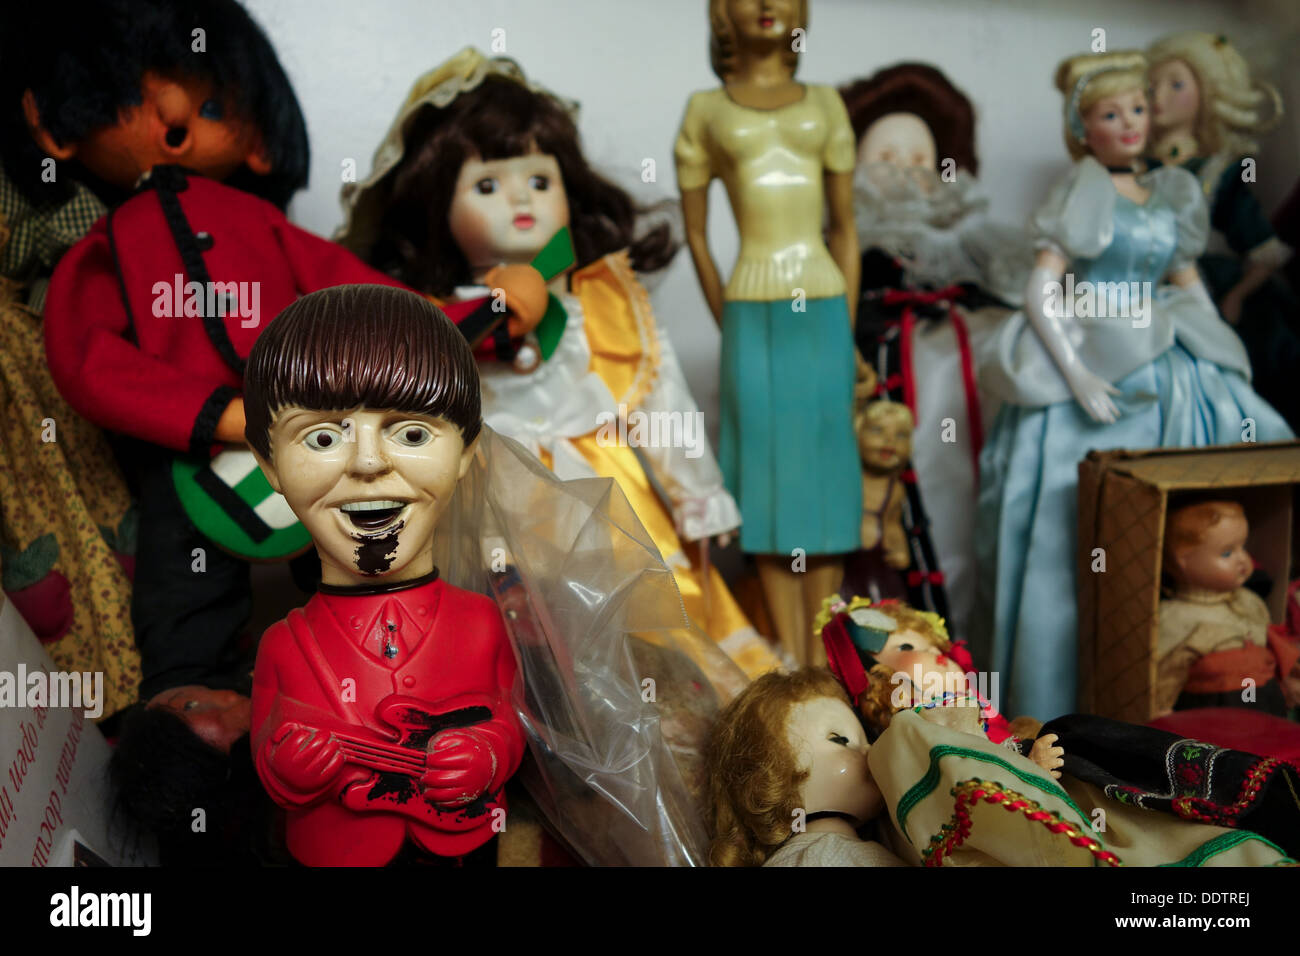 A Beatles Doll among many others in a Pittsburgh Antique Shop Stock Photo